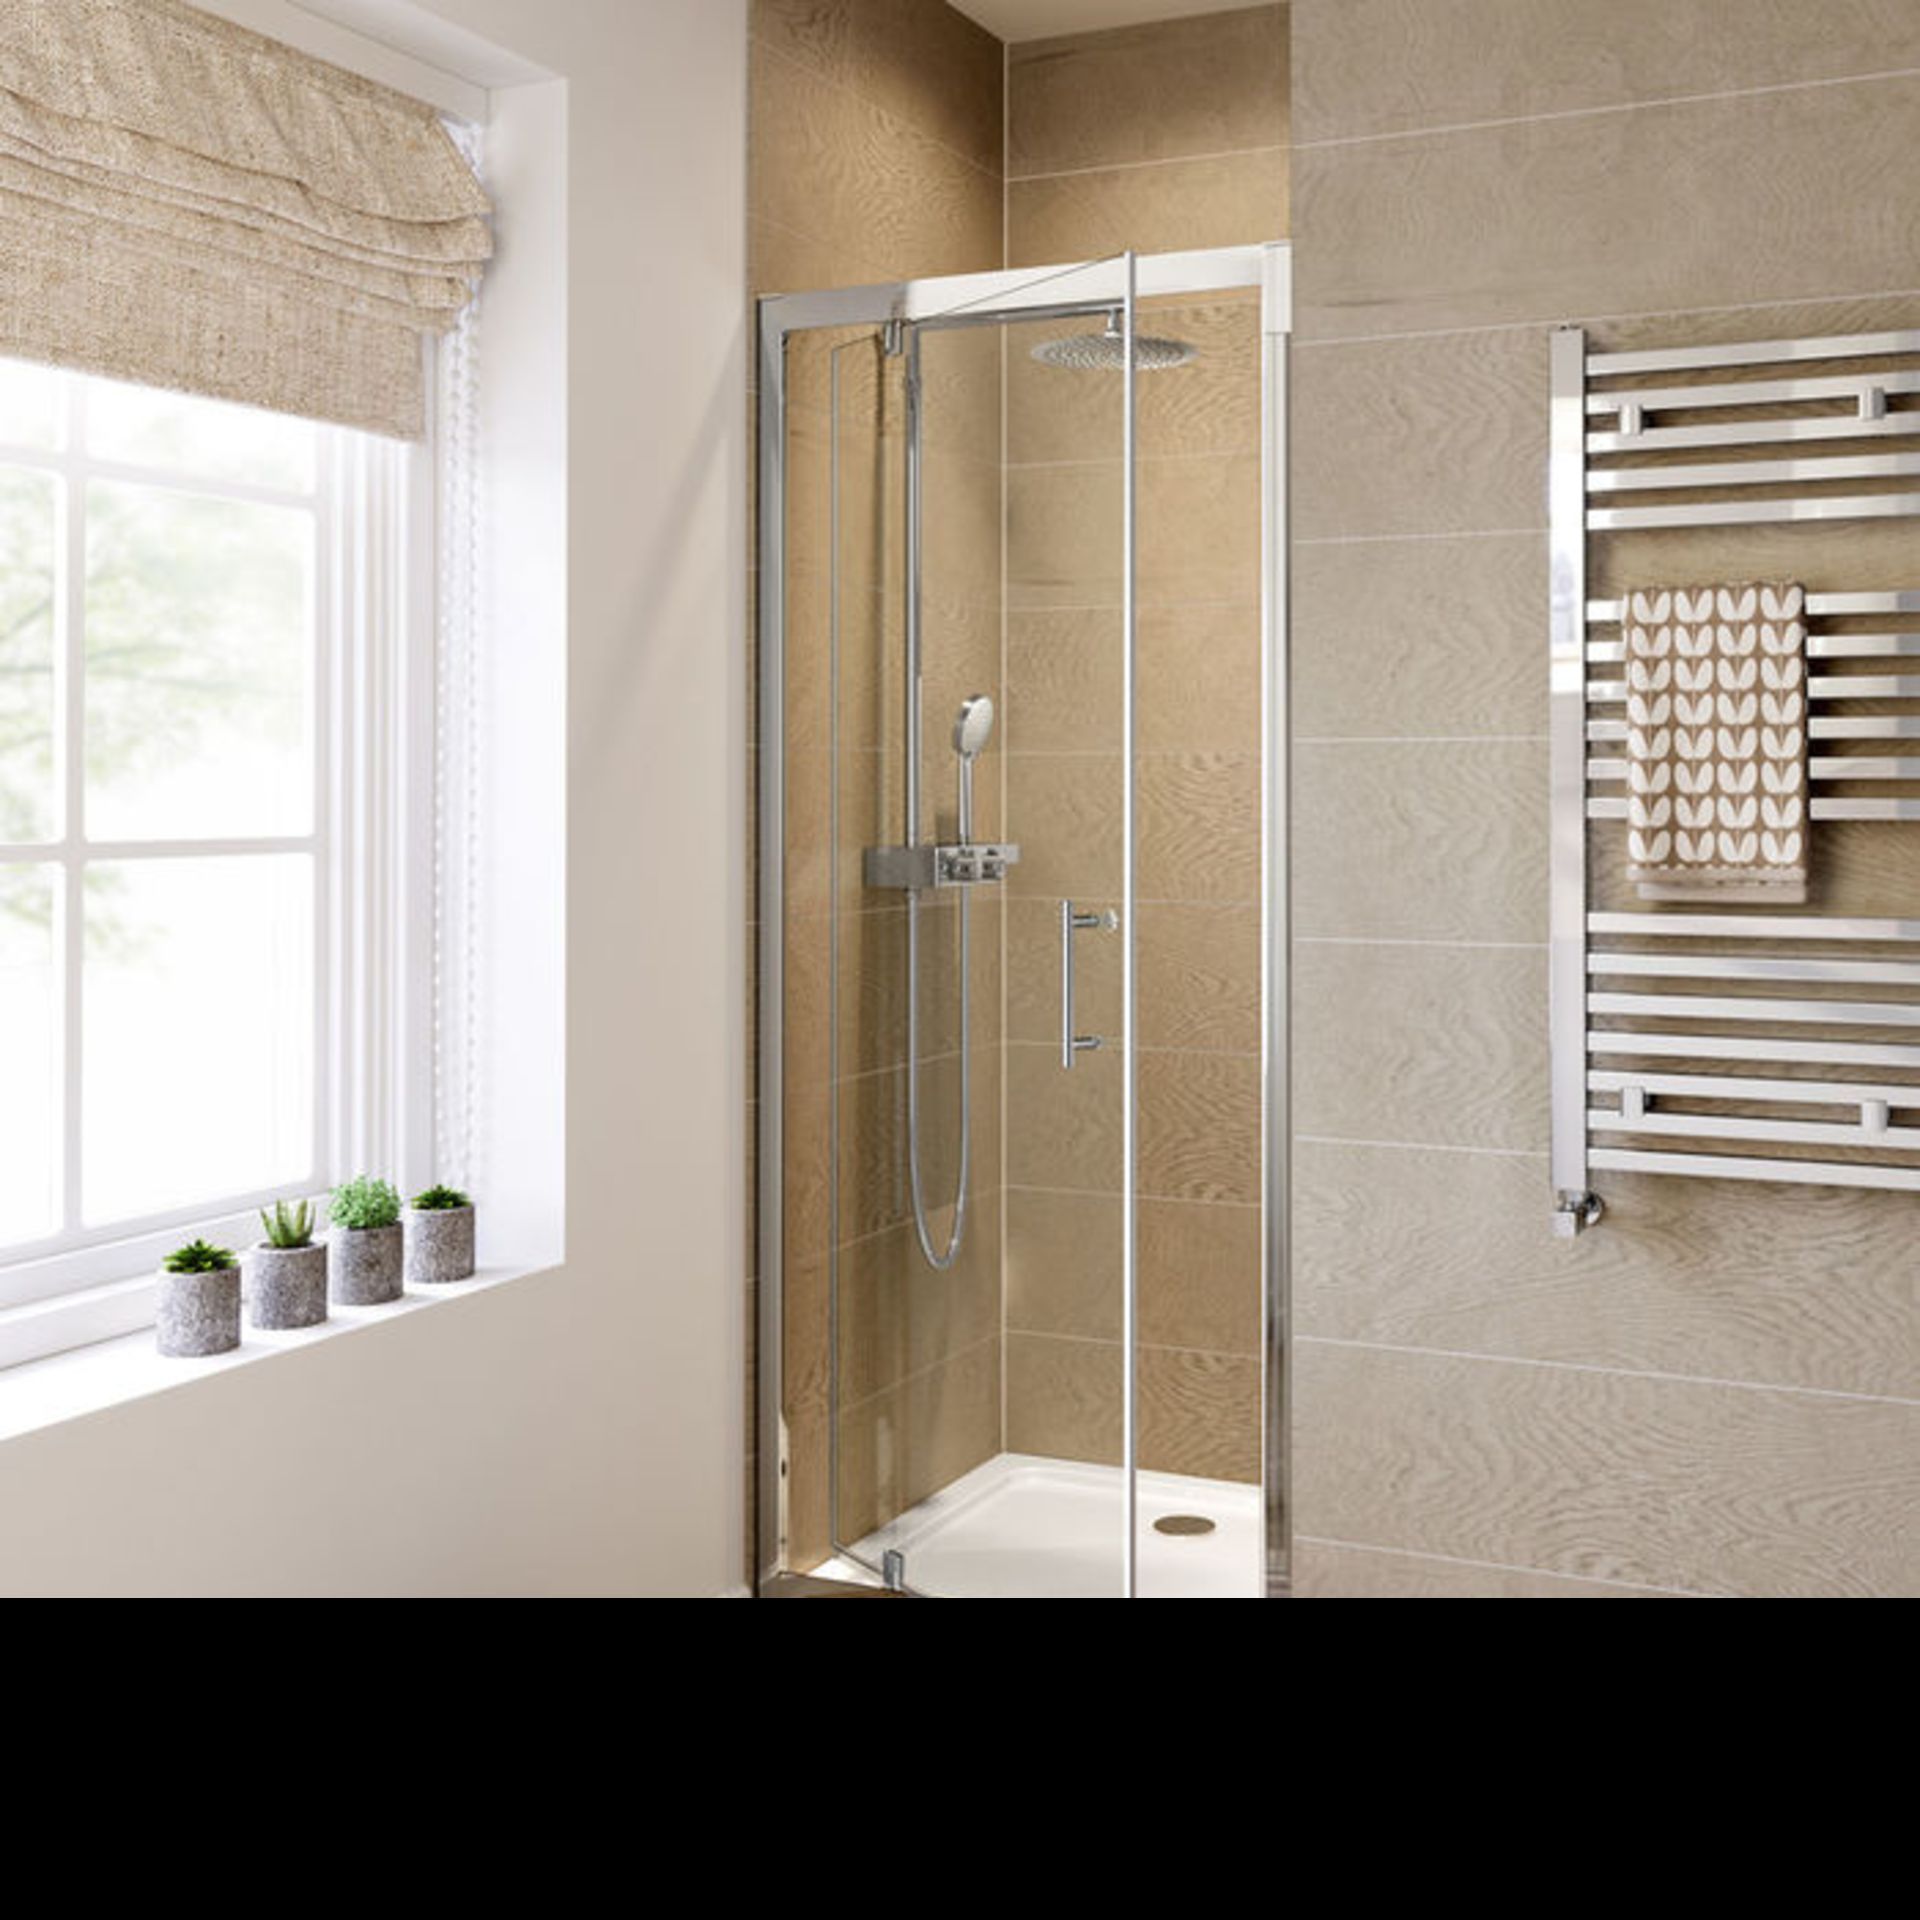 New 700mm - 6mm - Premium Pivot Shower Door. RRP £299.99. 8mm Safety Glass Fully Waterproof ... - Image 2 of 2